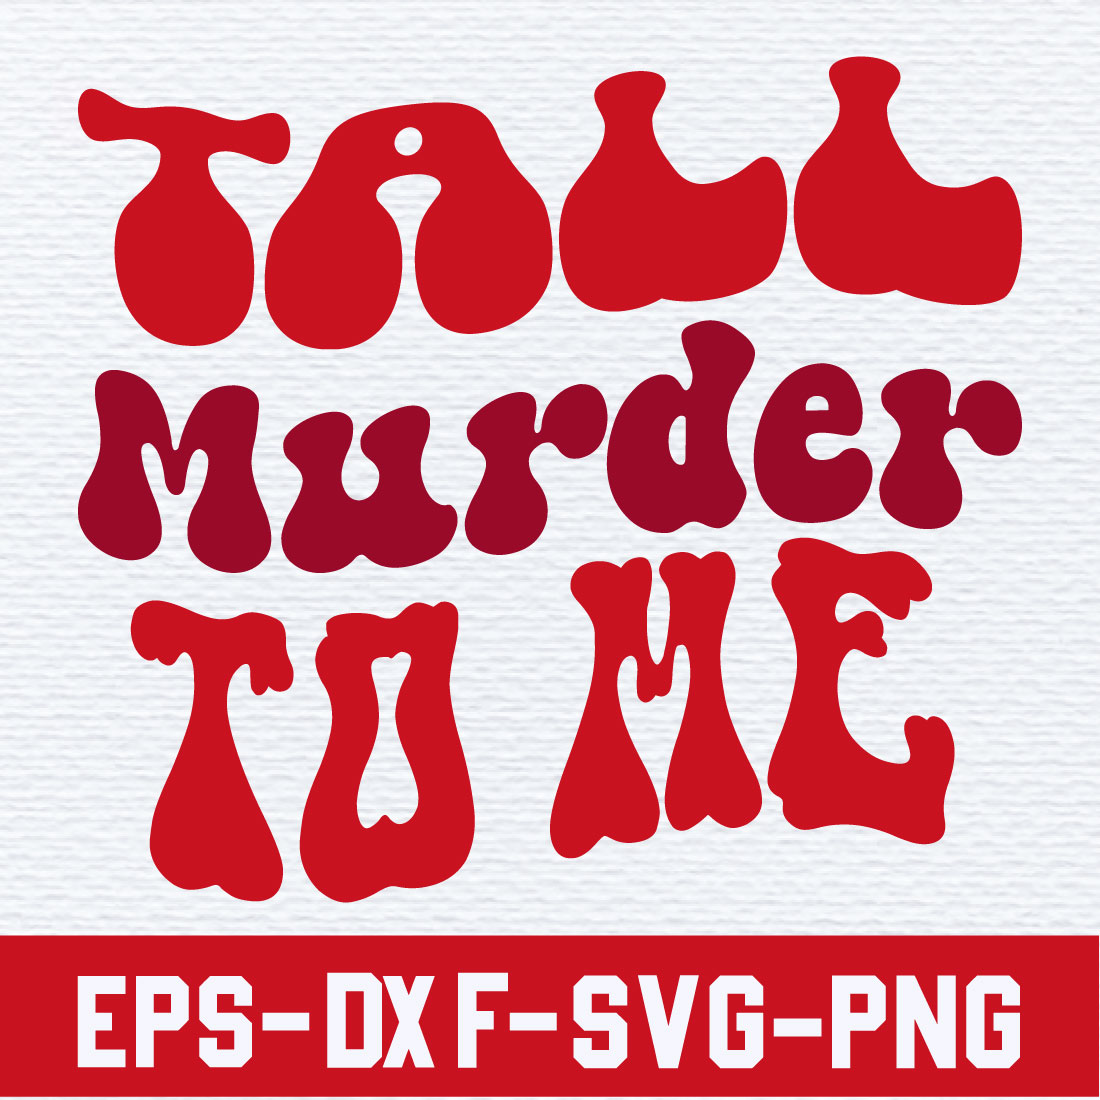 Tall Murder to me preview image.